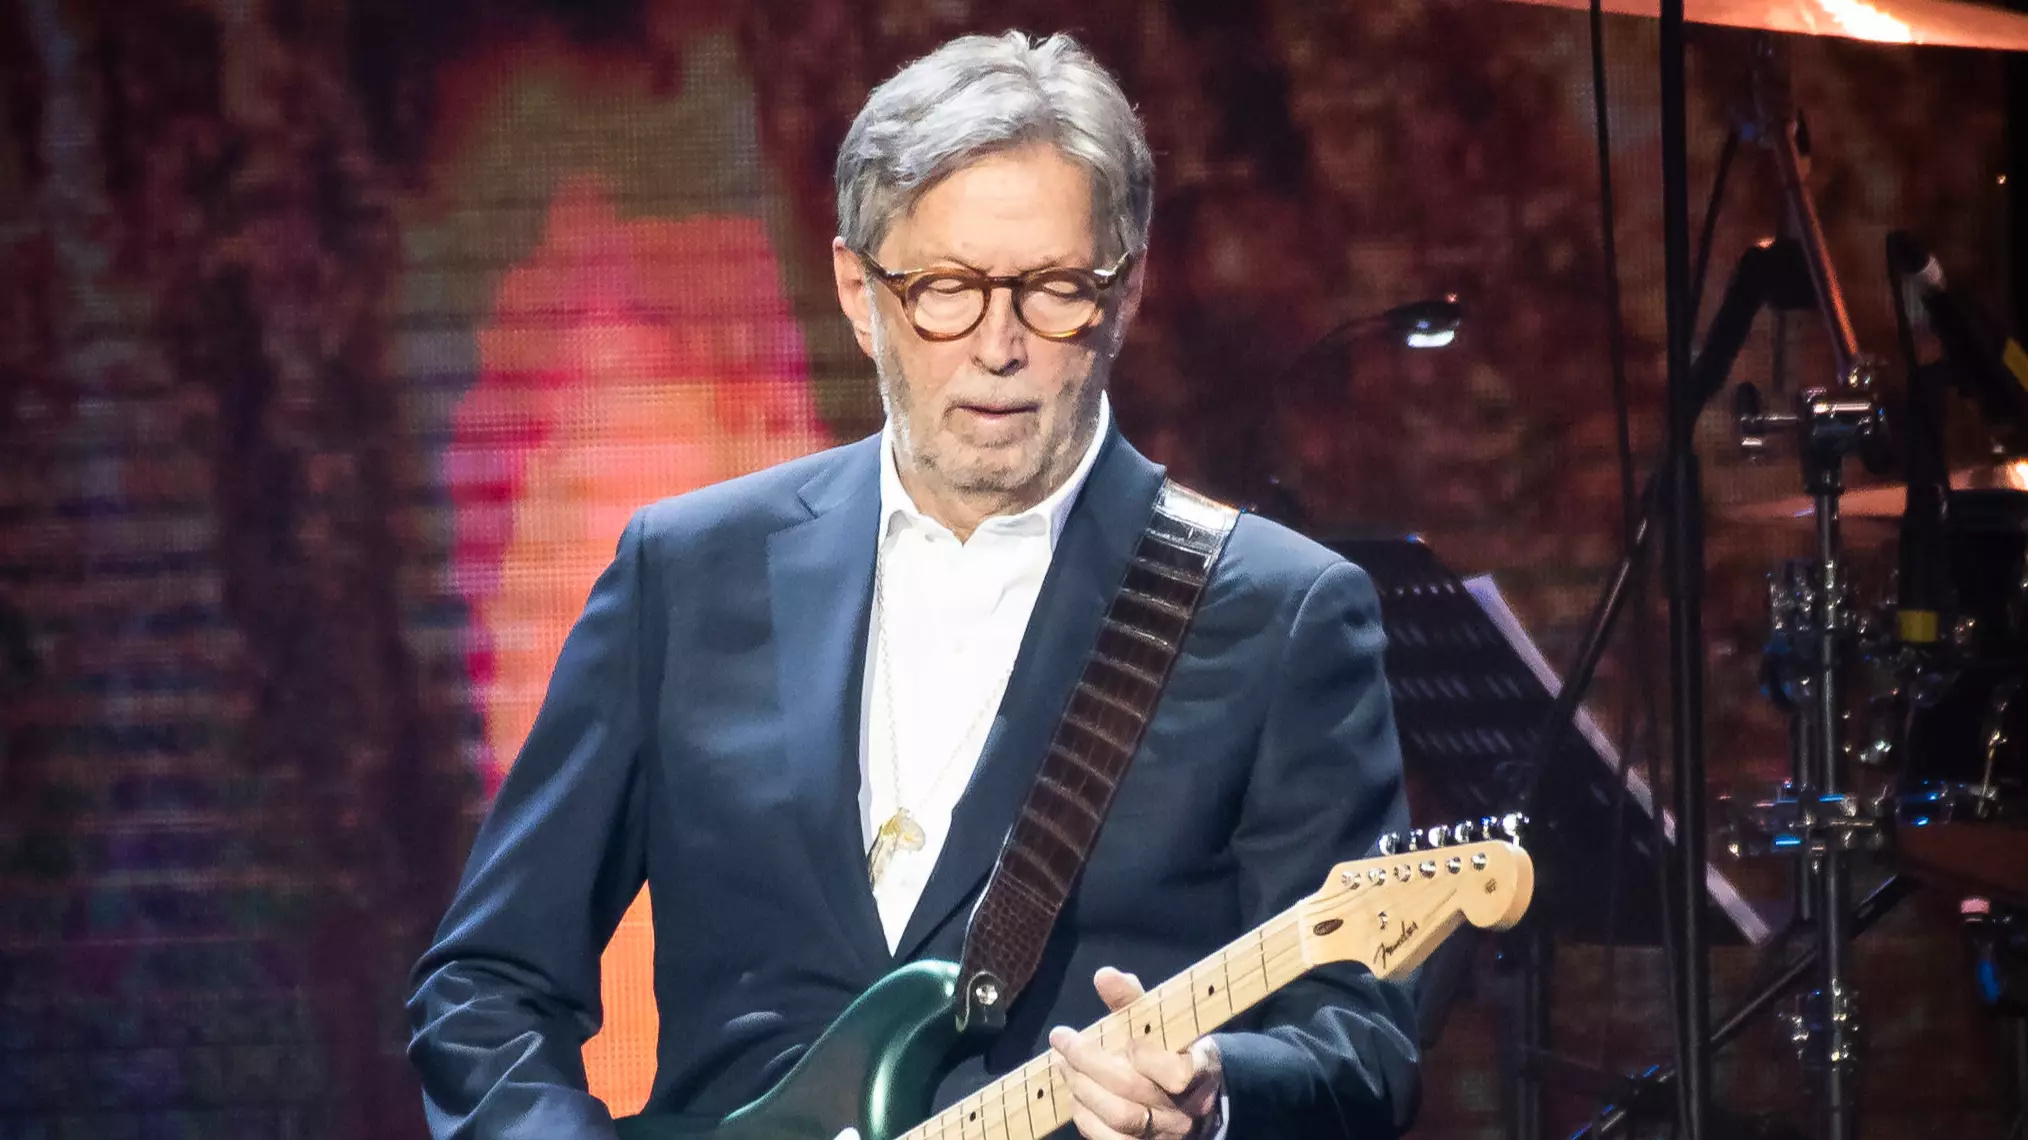 Eric Clapton Is Refusing To Play At Venues That Require Proof Of Covid-19 Vaccination